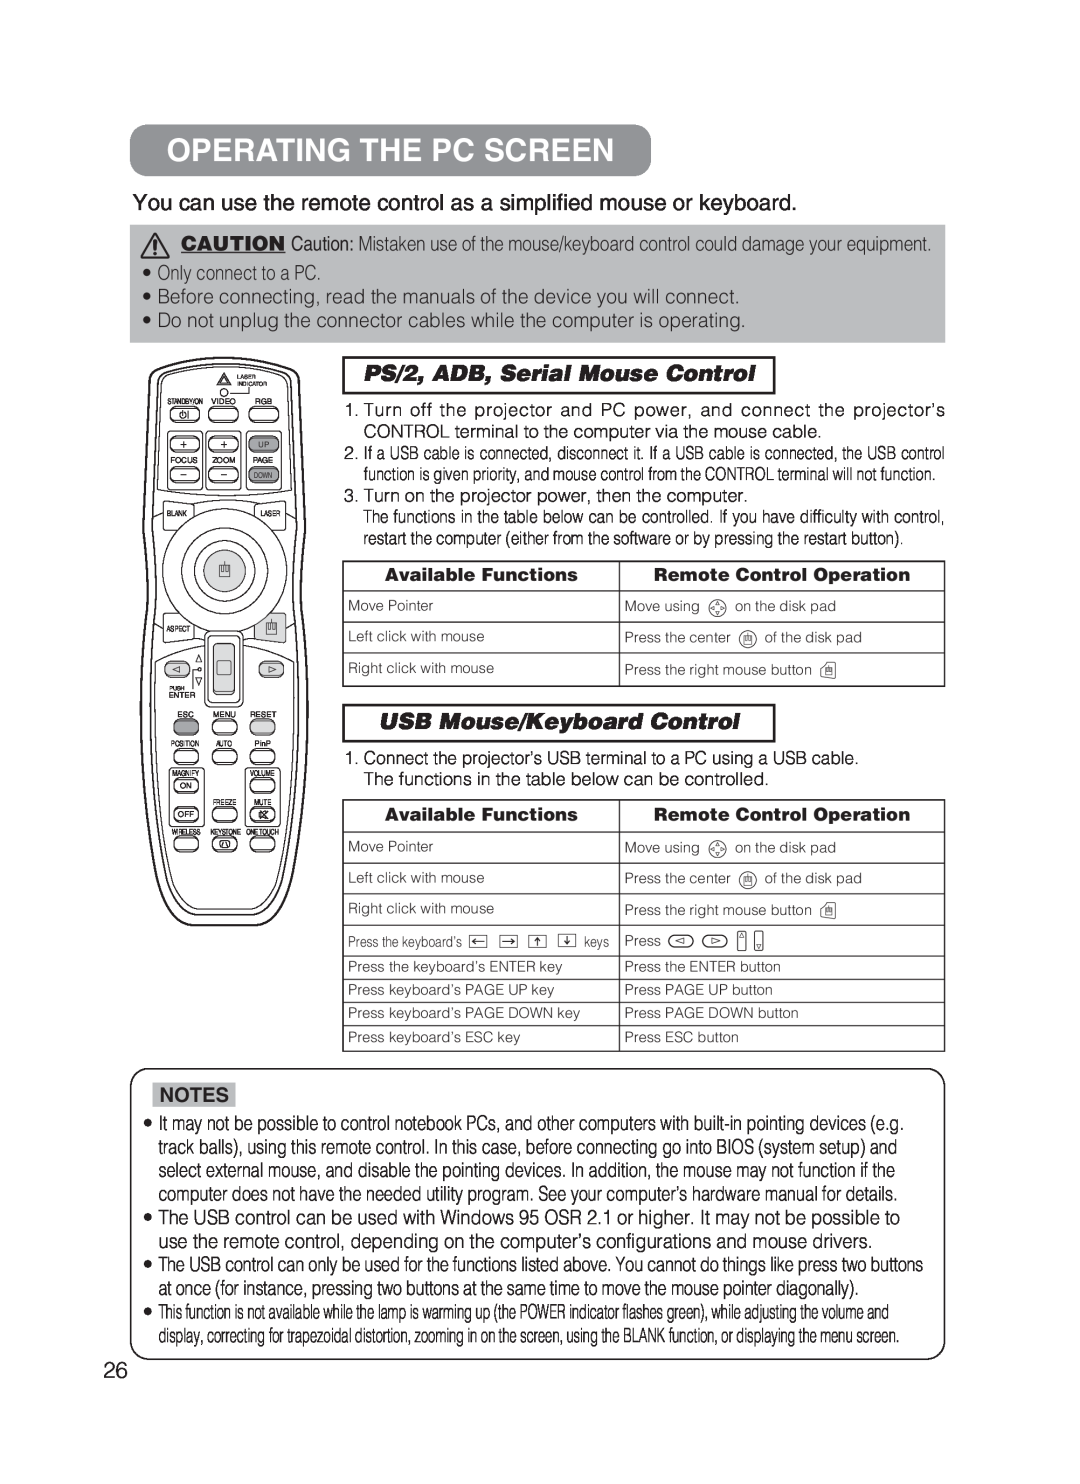 Hitachi CP-X870 user manual Operating The Pc Screen, PS/2, ADB, Serial Mouse Control, USB Mouse/Keyboard Control 